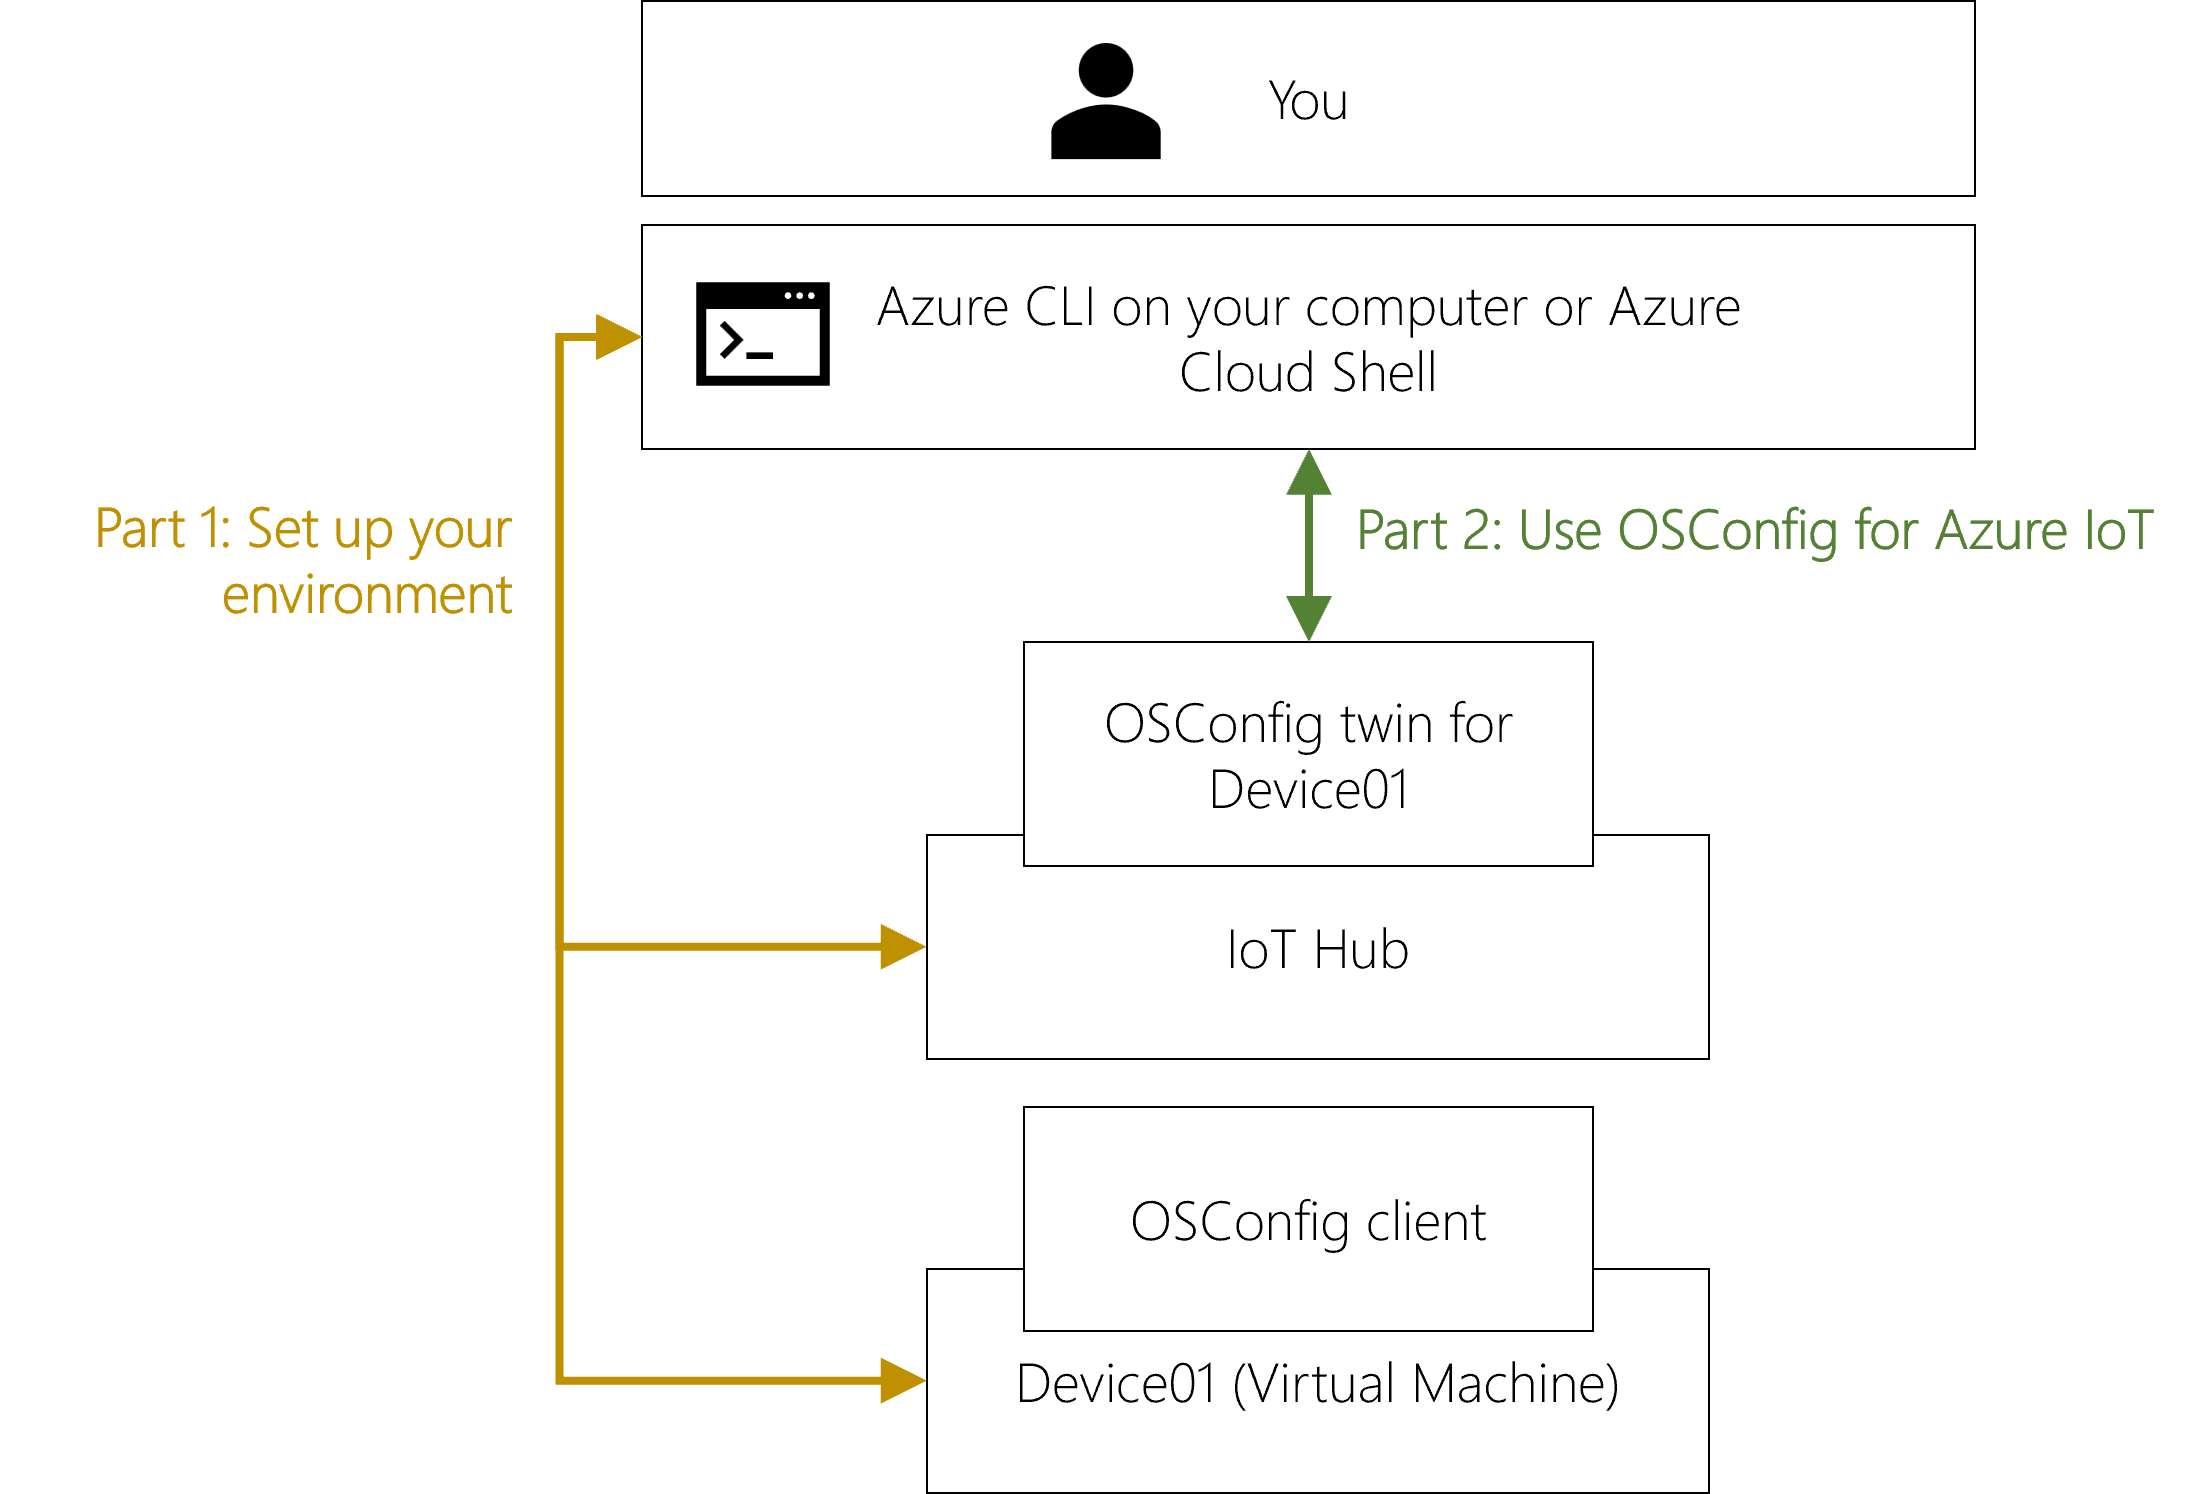 Diagram for context, showing Azure CLI being used to create IoT Hub and VM, and being used to use OSConfig